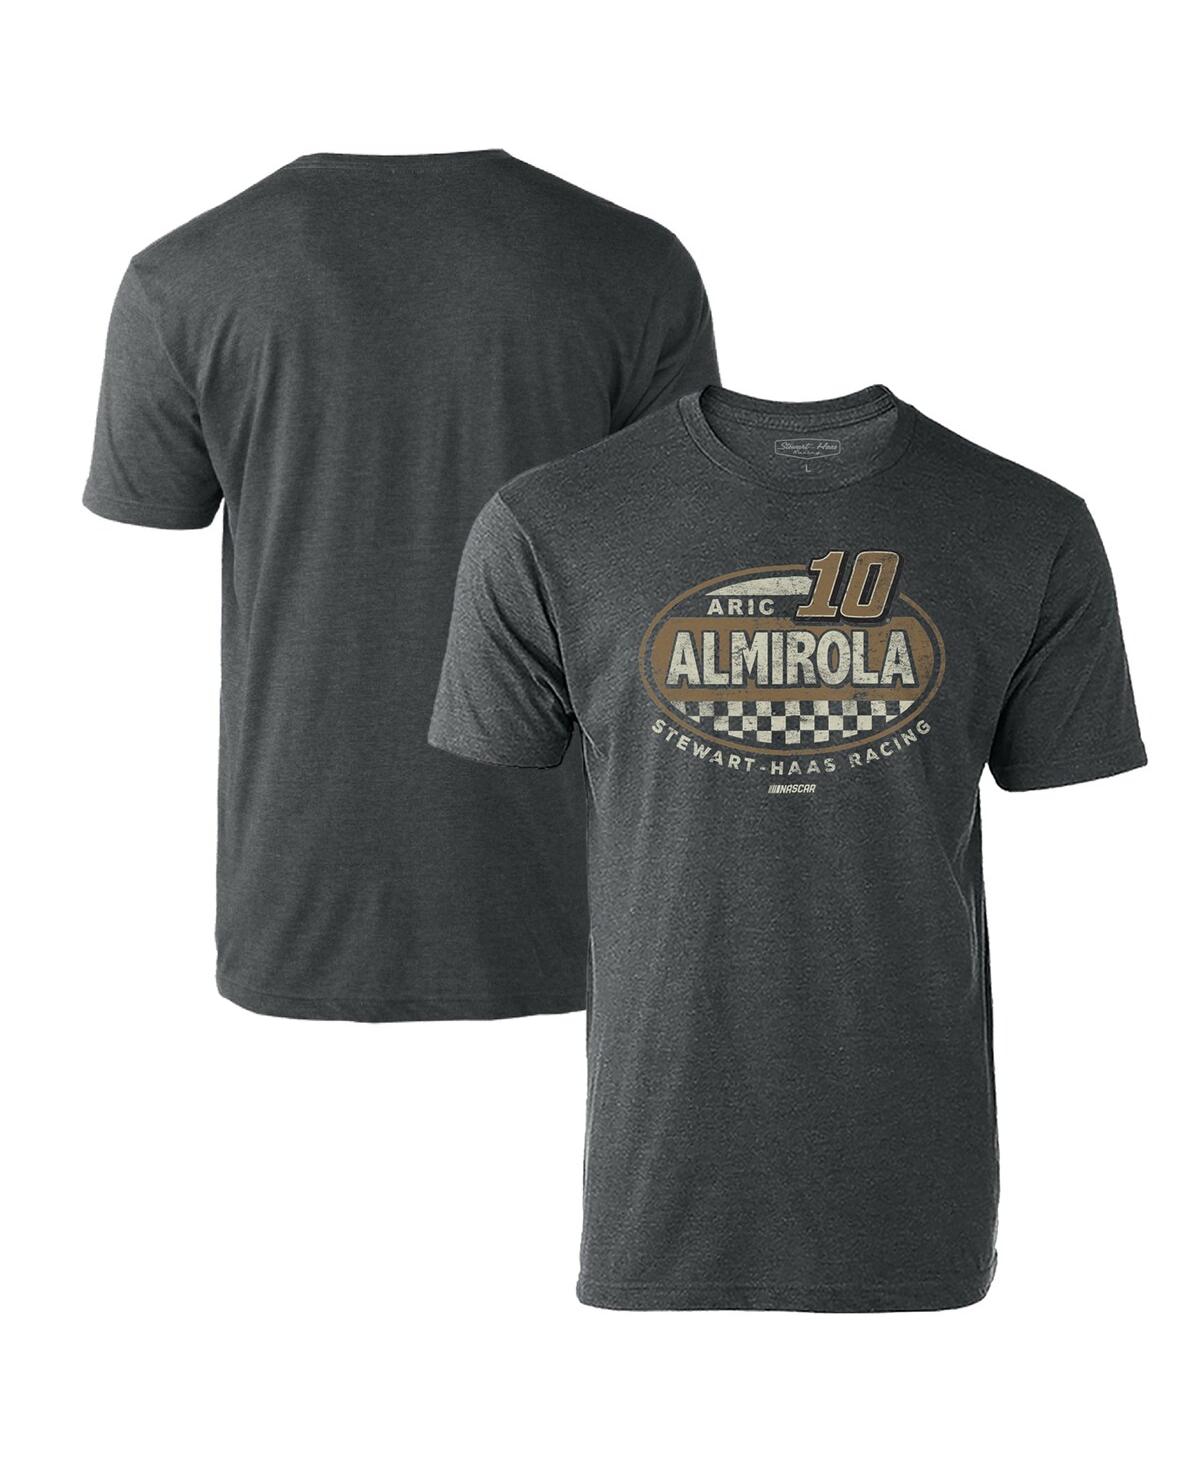 Stewart-haas Racing Team Collection Men's  Heathered Charcoal Aric Almirola Vintage-like Rookie T-shi